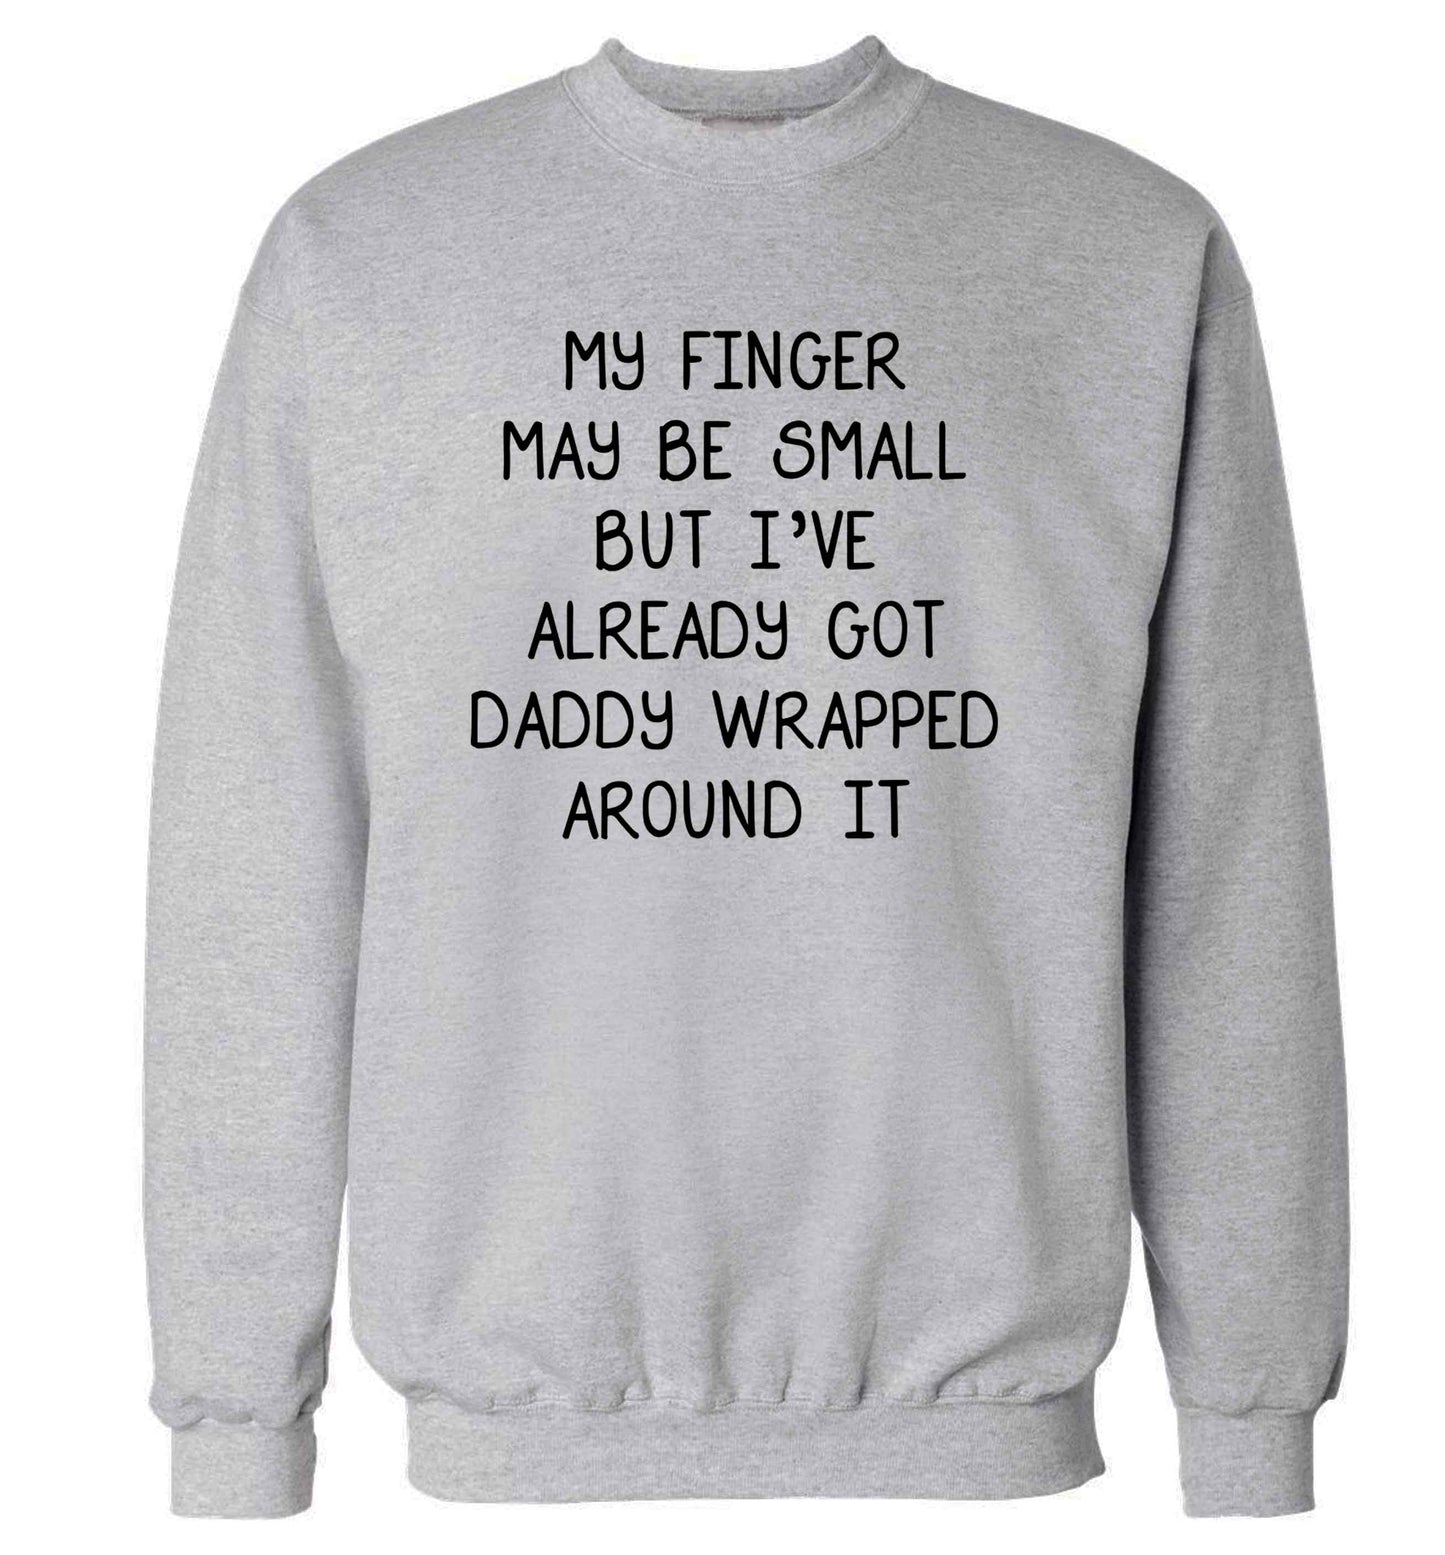 My finger may be small but I've already got daddy wrapped around it adult's unisex grey sweater 2XL